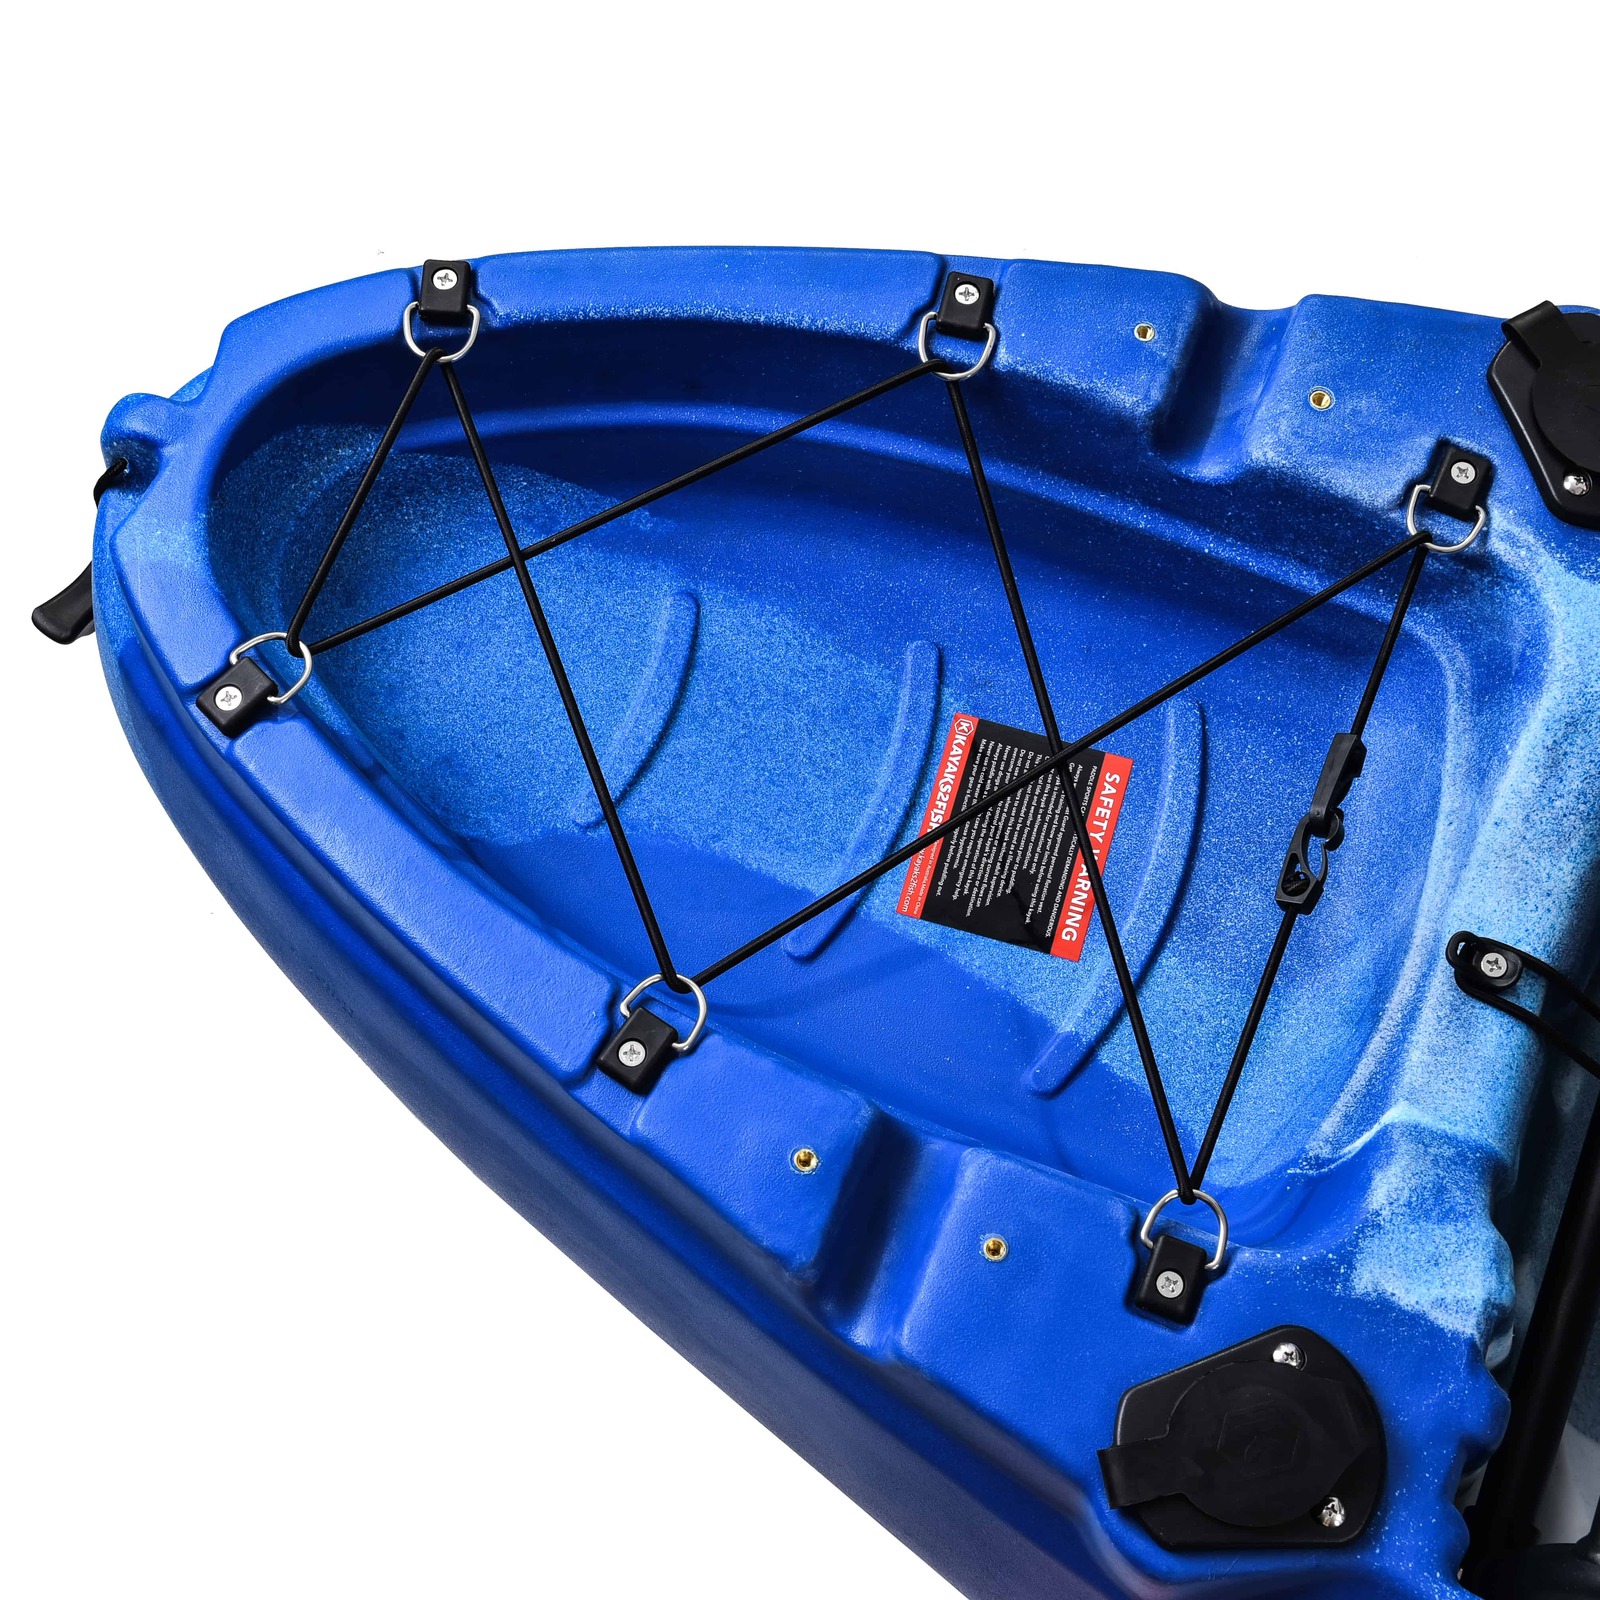 Eagle Pro Double Fishing Kayak Package - Blue Lagoon [Perth]